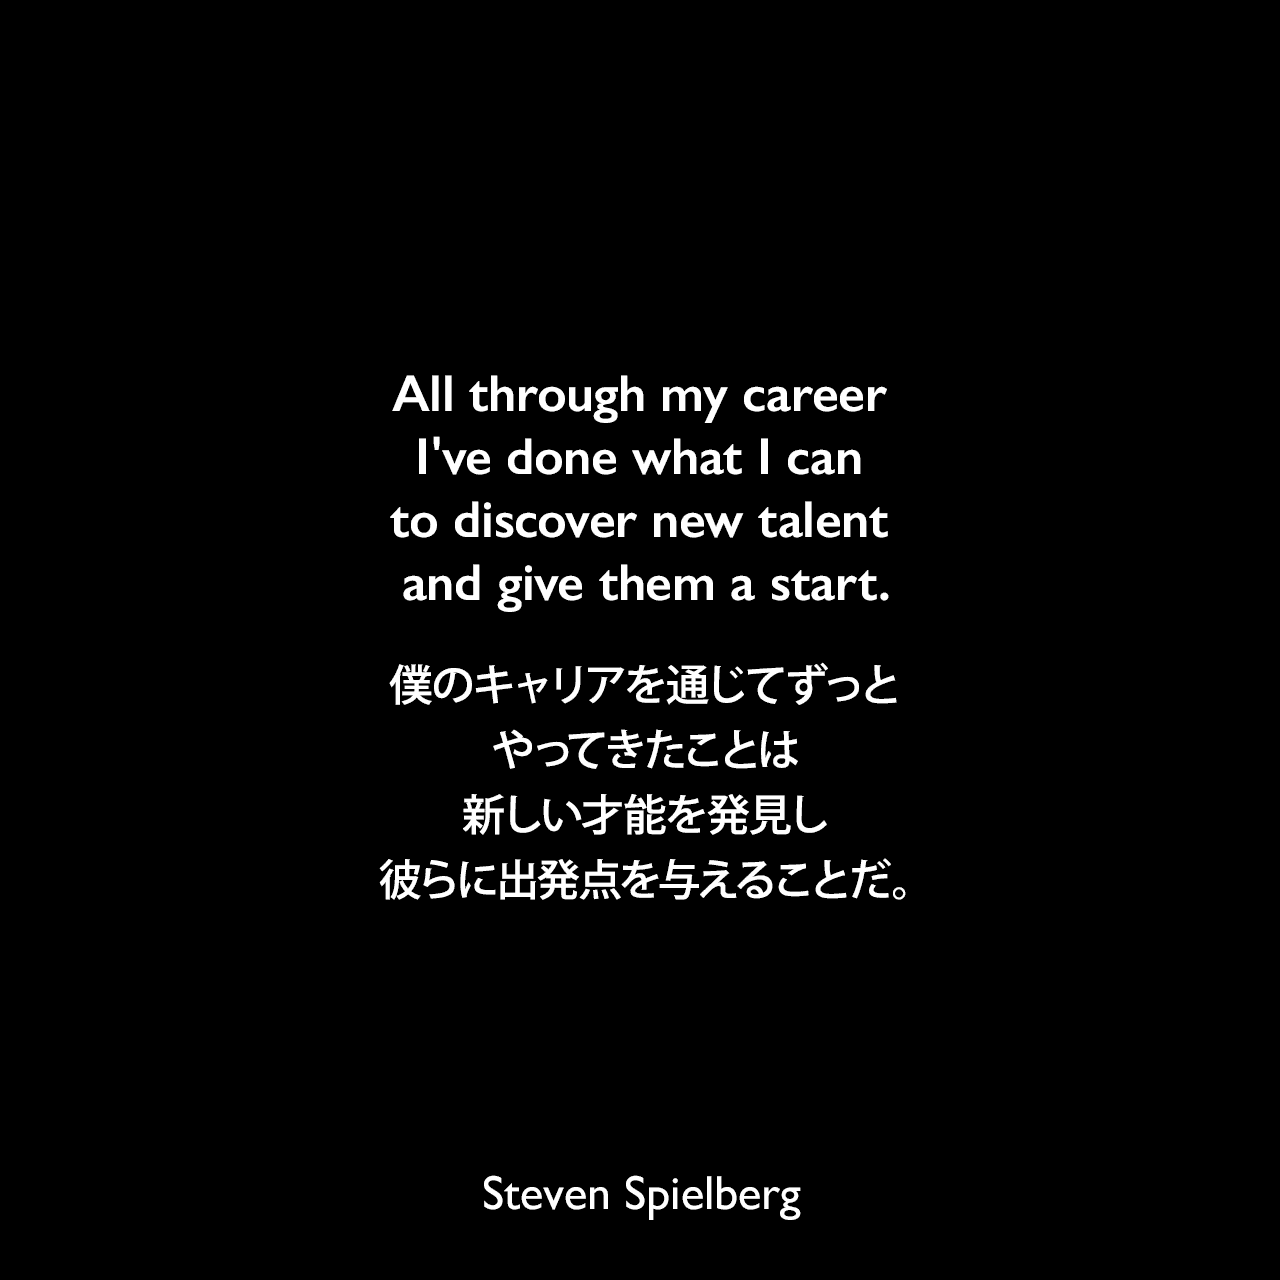 All through my career I've done what I can to discover new talent and give them a start.僕のキャリアを通じてずっとやってきたことは、新しい才能を発見し、彼らに出発点を与えることだ。Steven Spielberg